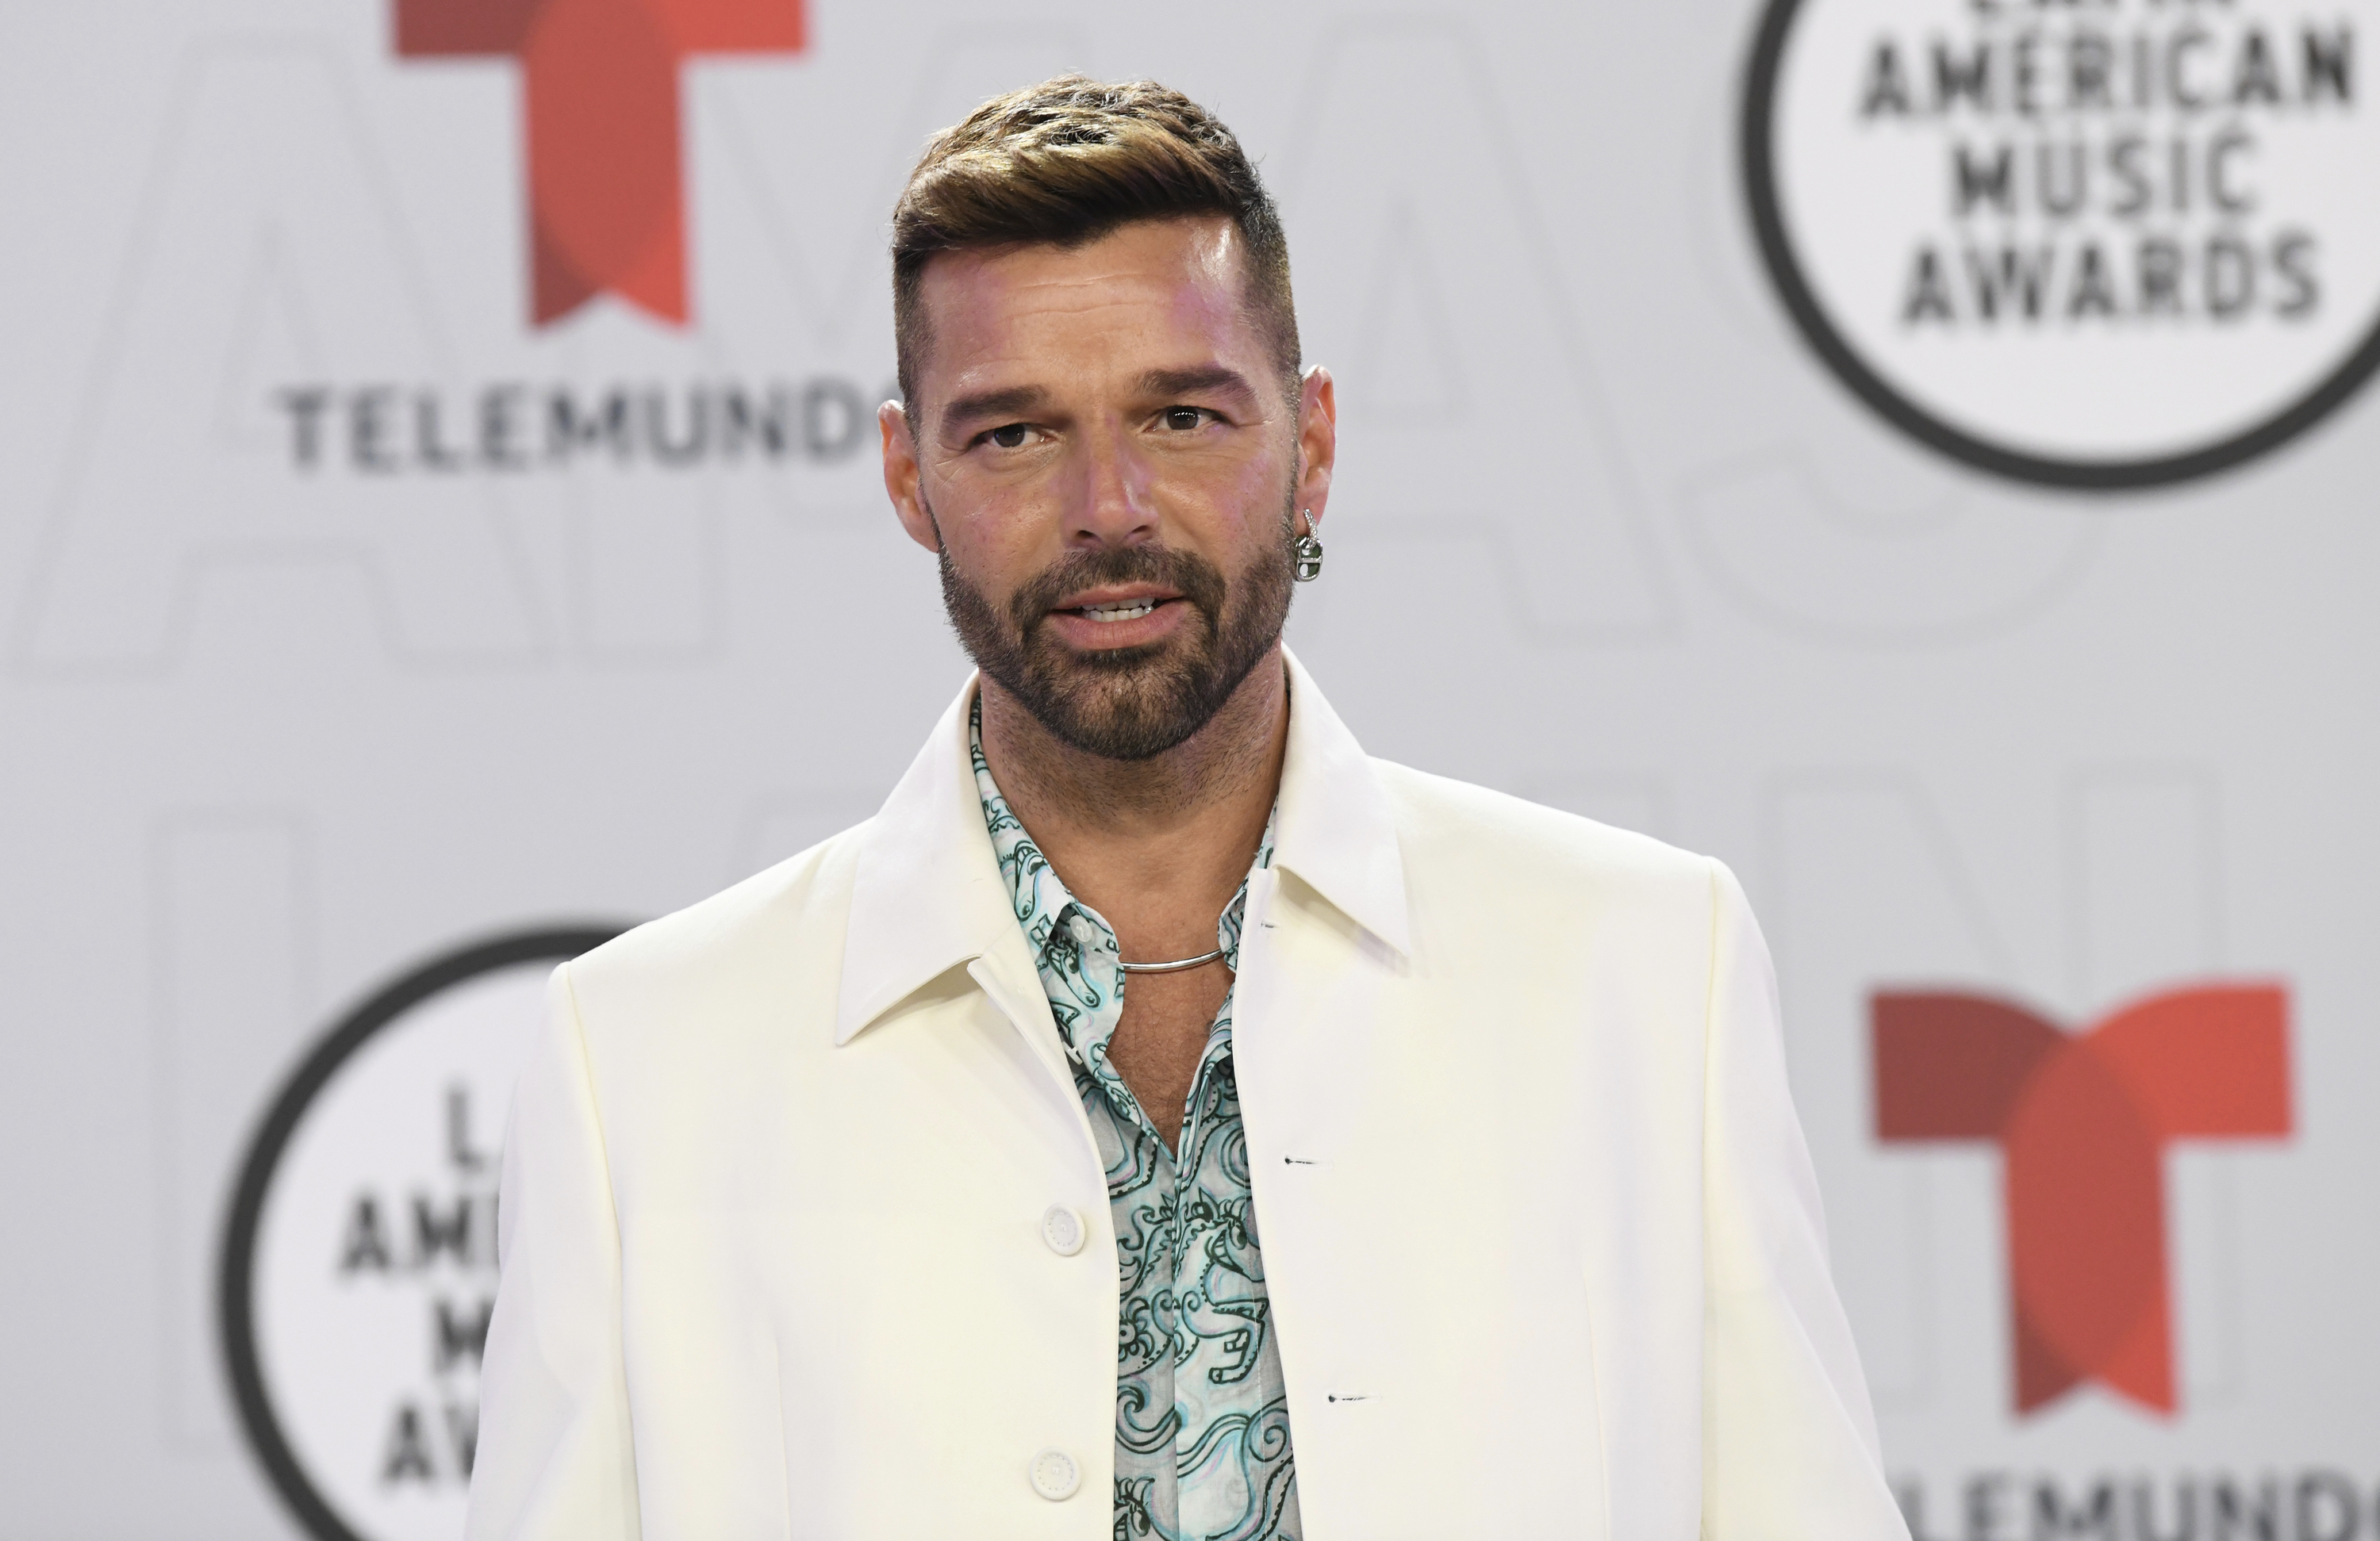 Ricky Martin arrives at the Latin American Music Awards at the BB&T Center on Thursday, April 15, 2021, in Sunrise, Florida